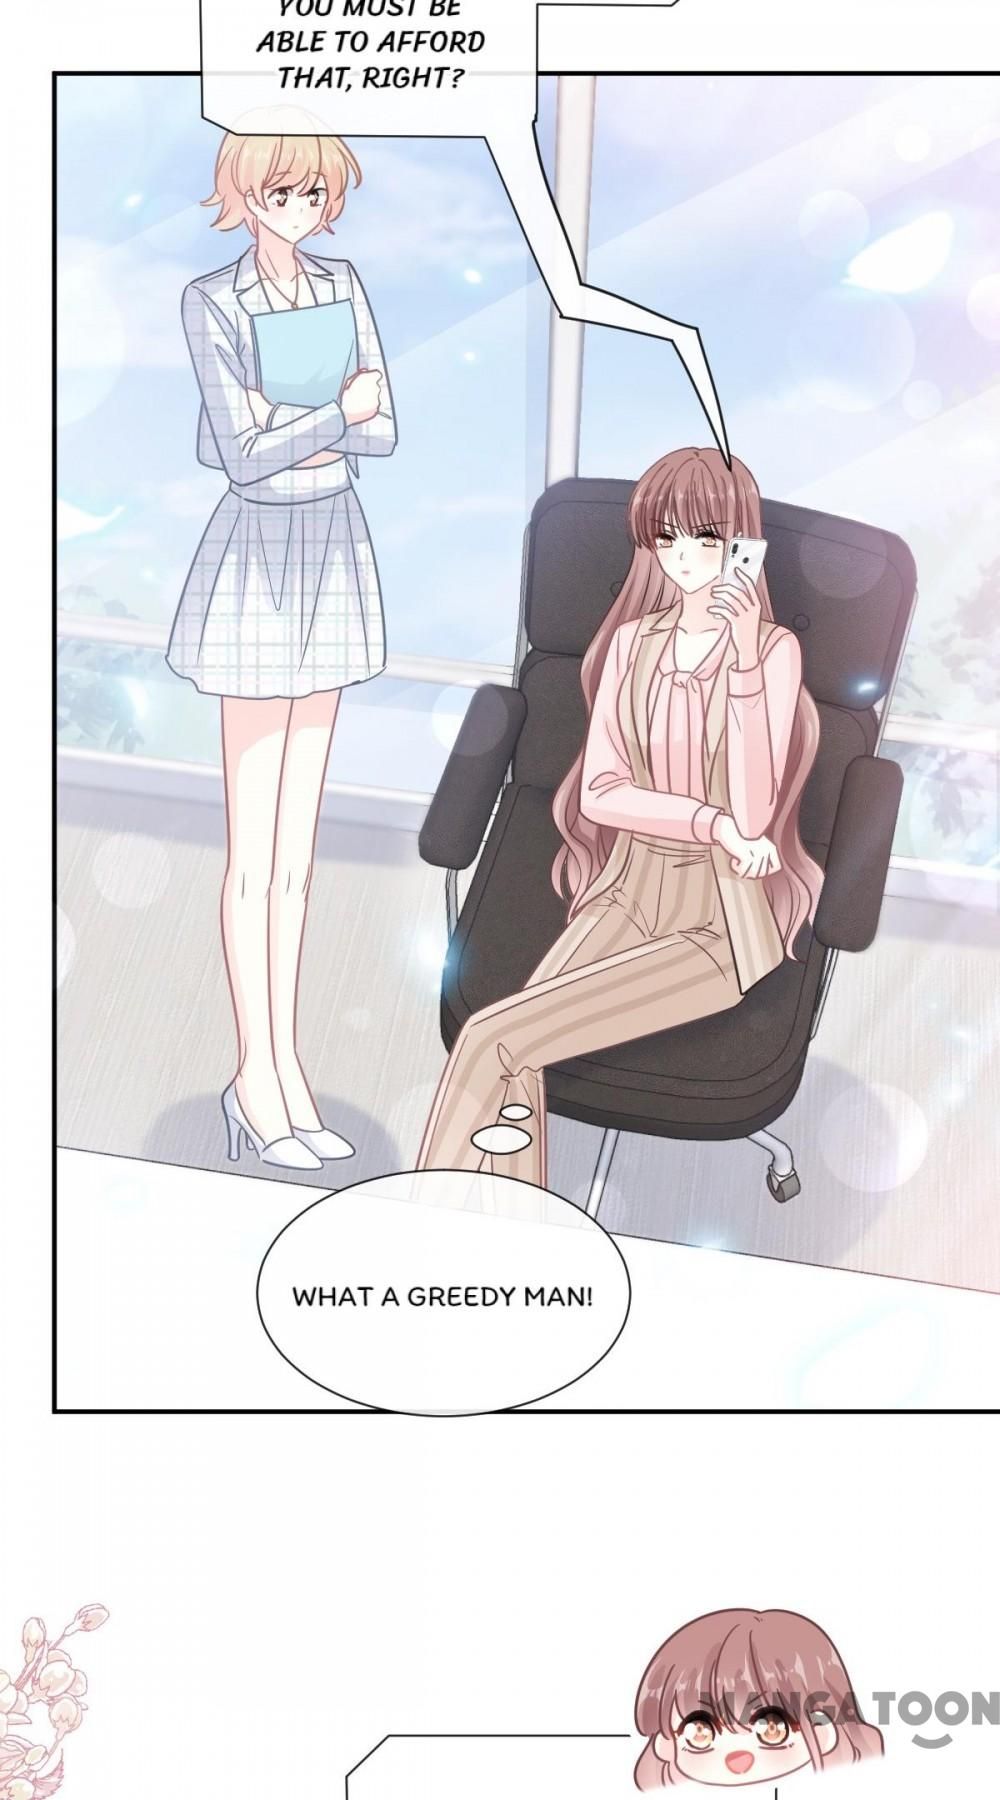 Love Me Gently, Bossy Ceo - chapter 180 - #2